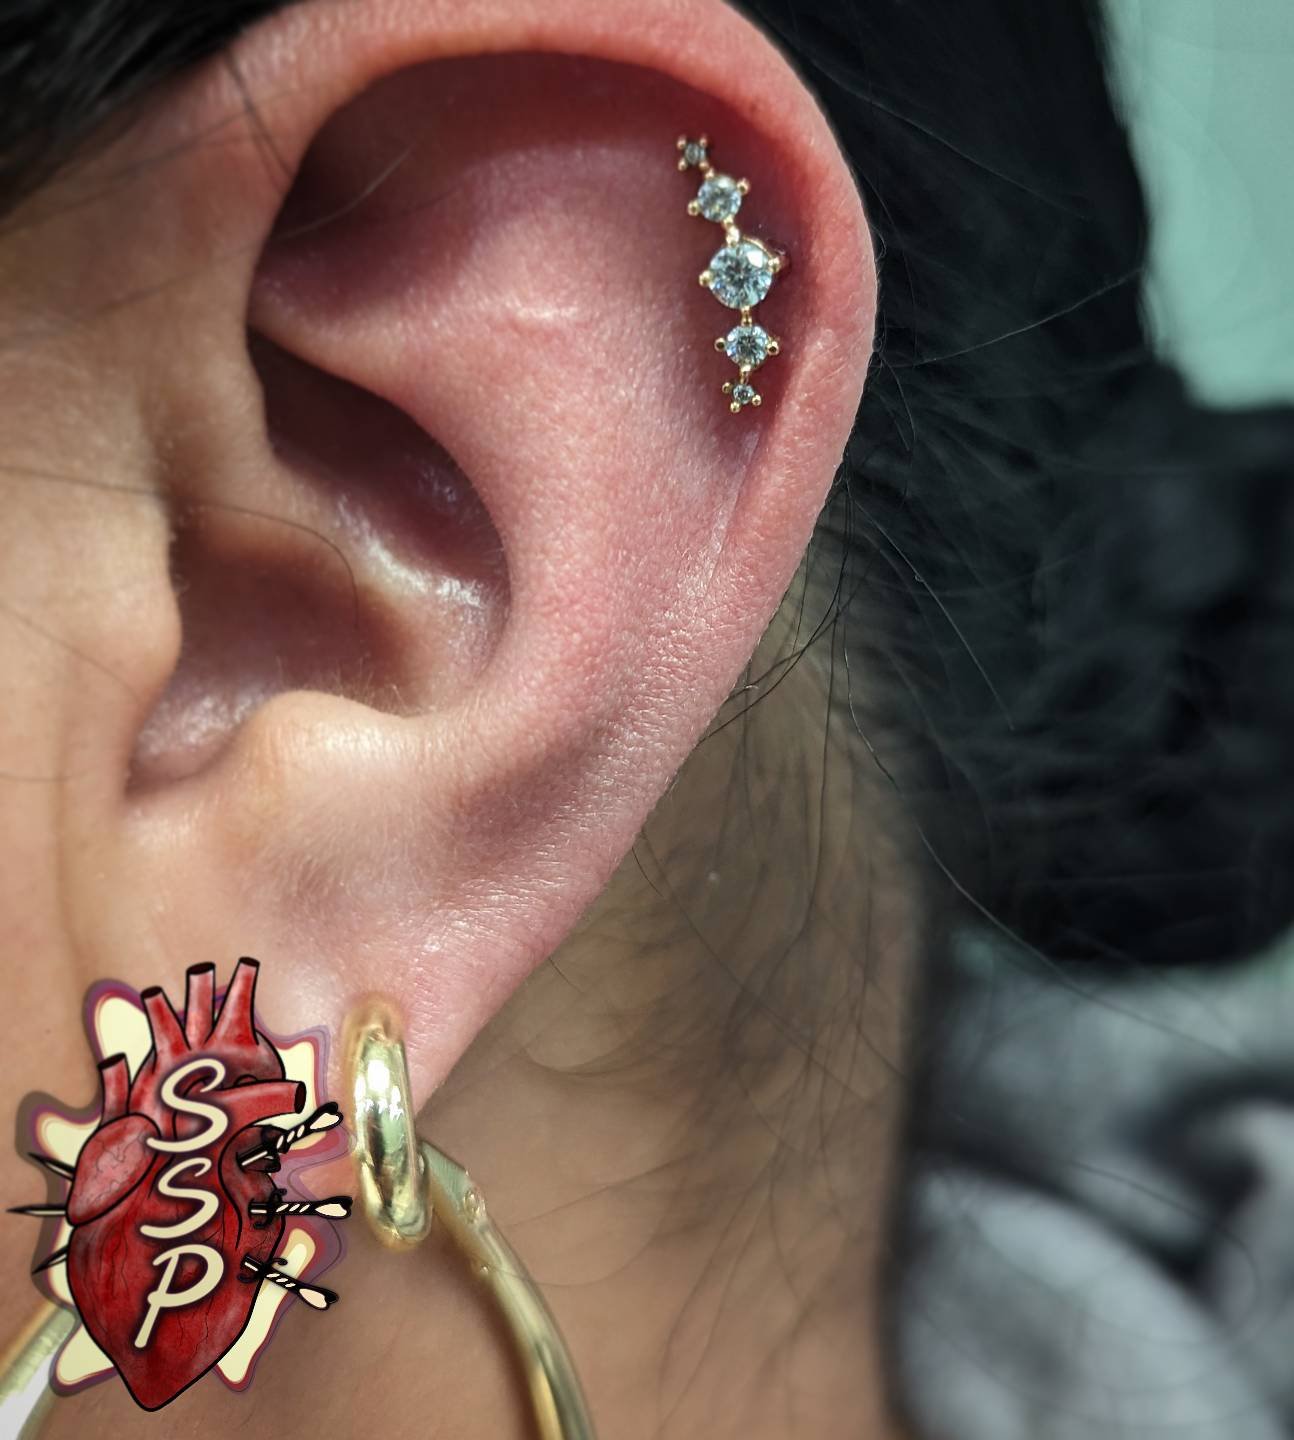 Helix piercing with a perfectly placed 14k gold cluster

If you're interested in coming in for a piercing. There is no appointment needed, you can just come into the shop while we are open. Any questions about piercings you can always give the shop a